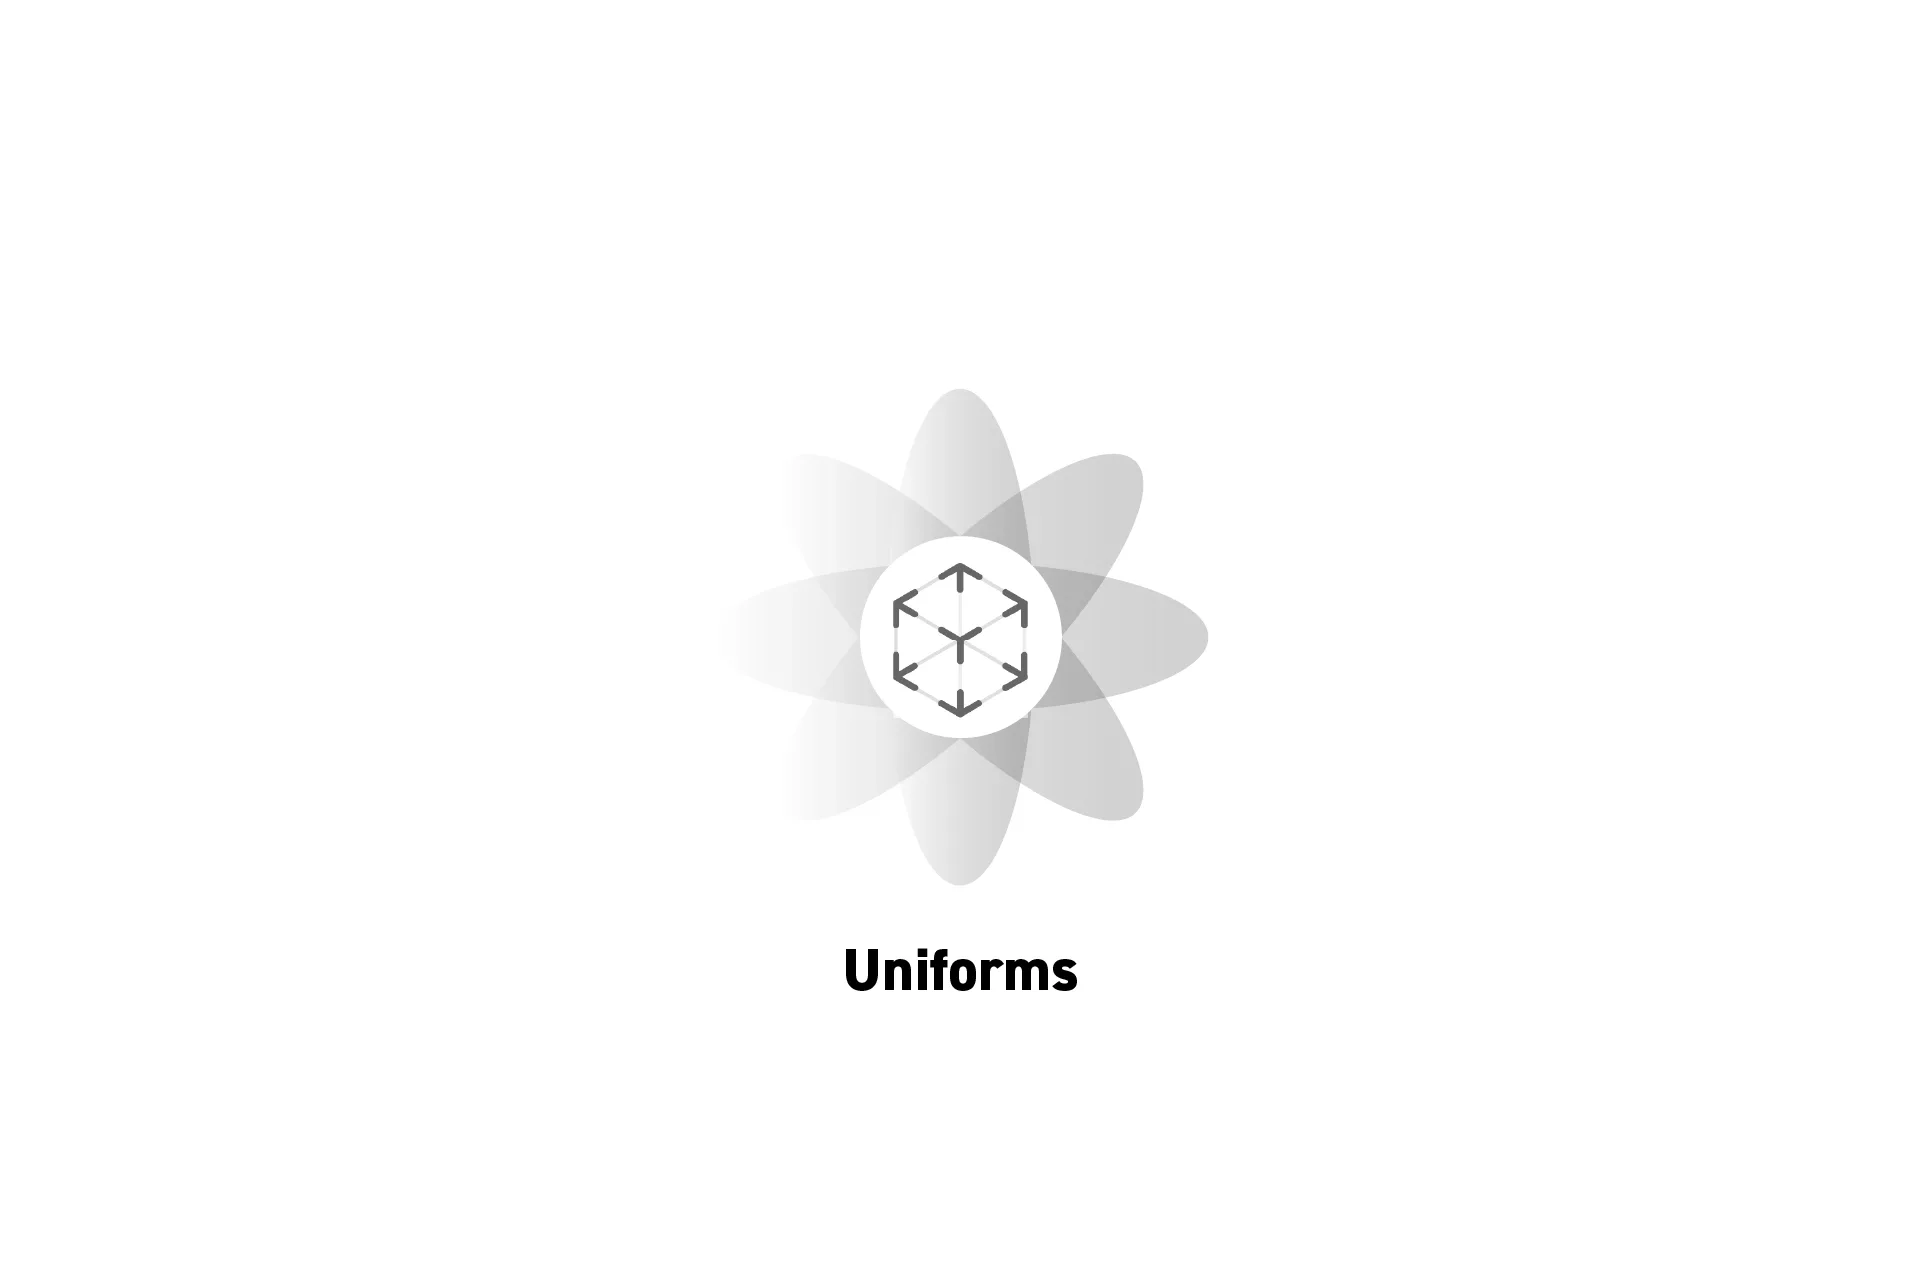 A flower that represents spatial computing with the text "Uniforms" beneath it.